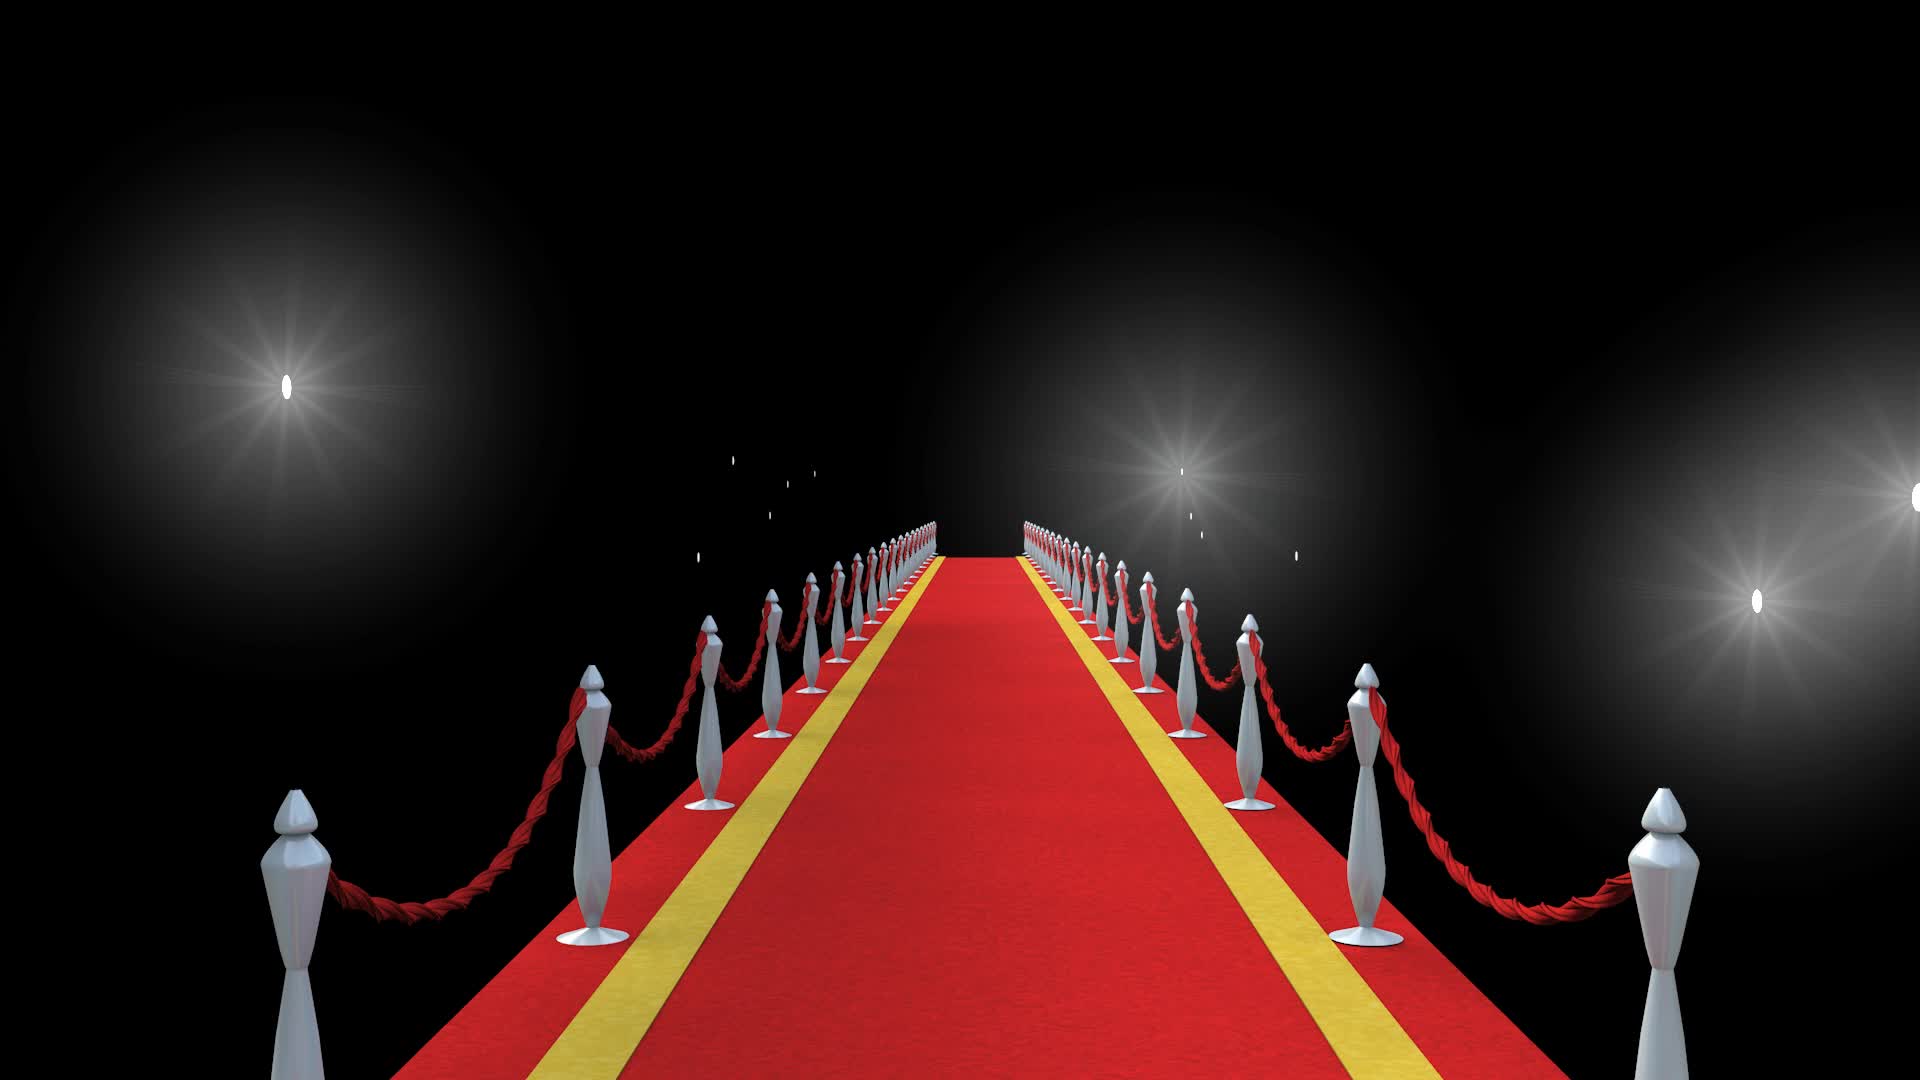 free clipart images red carpet - photo #32